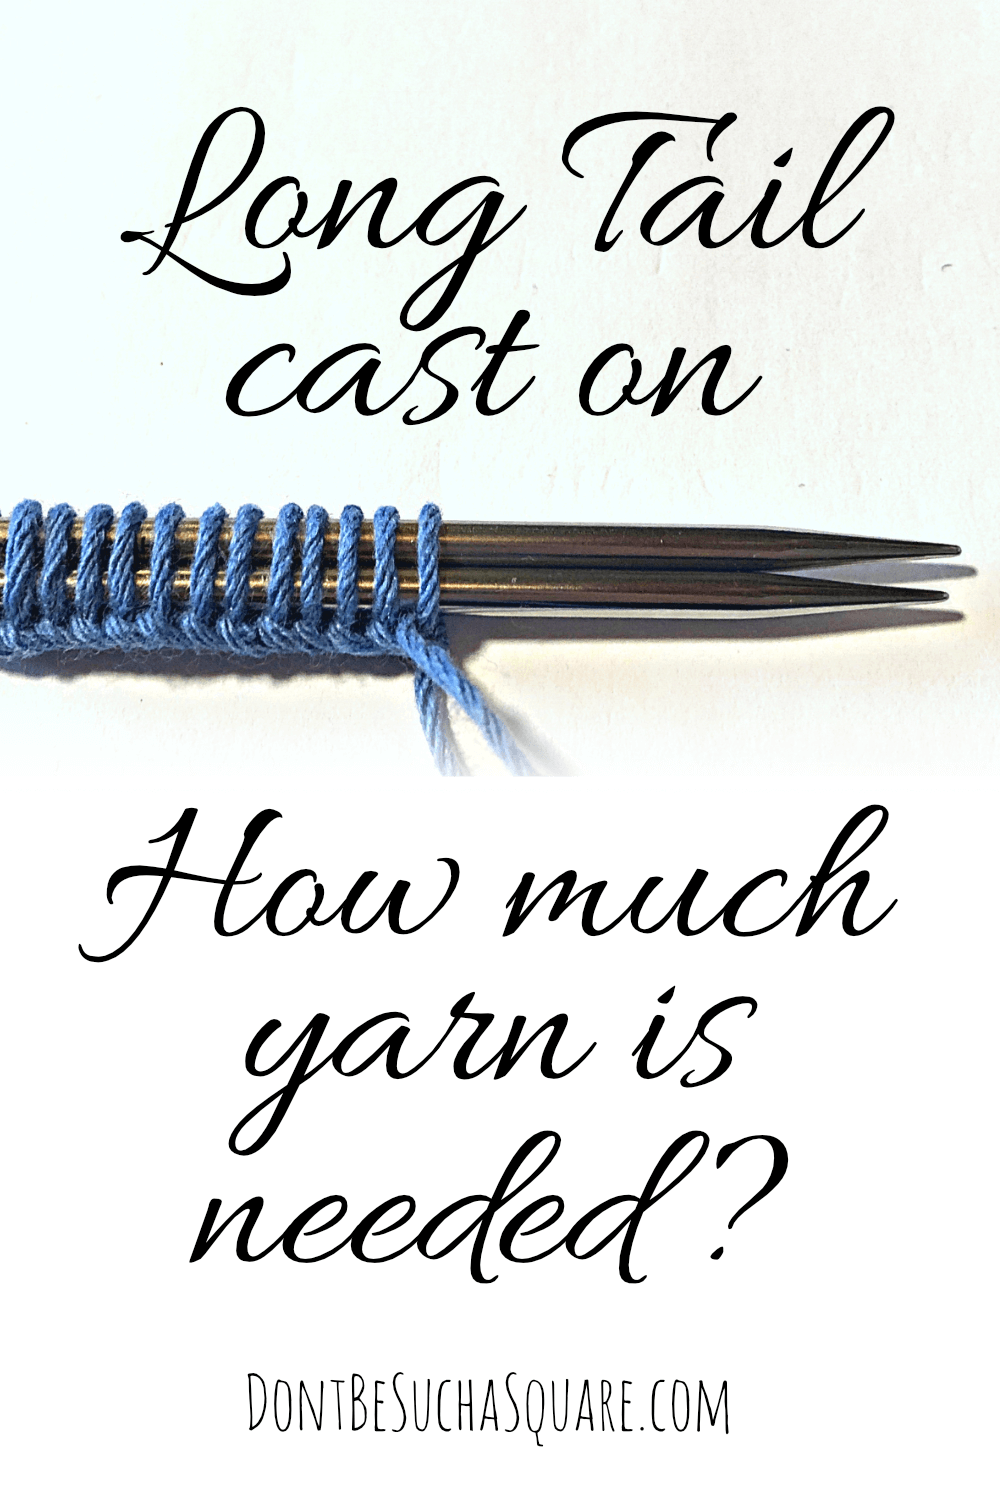 How much yarn is needed for a long tail cast on?